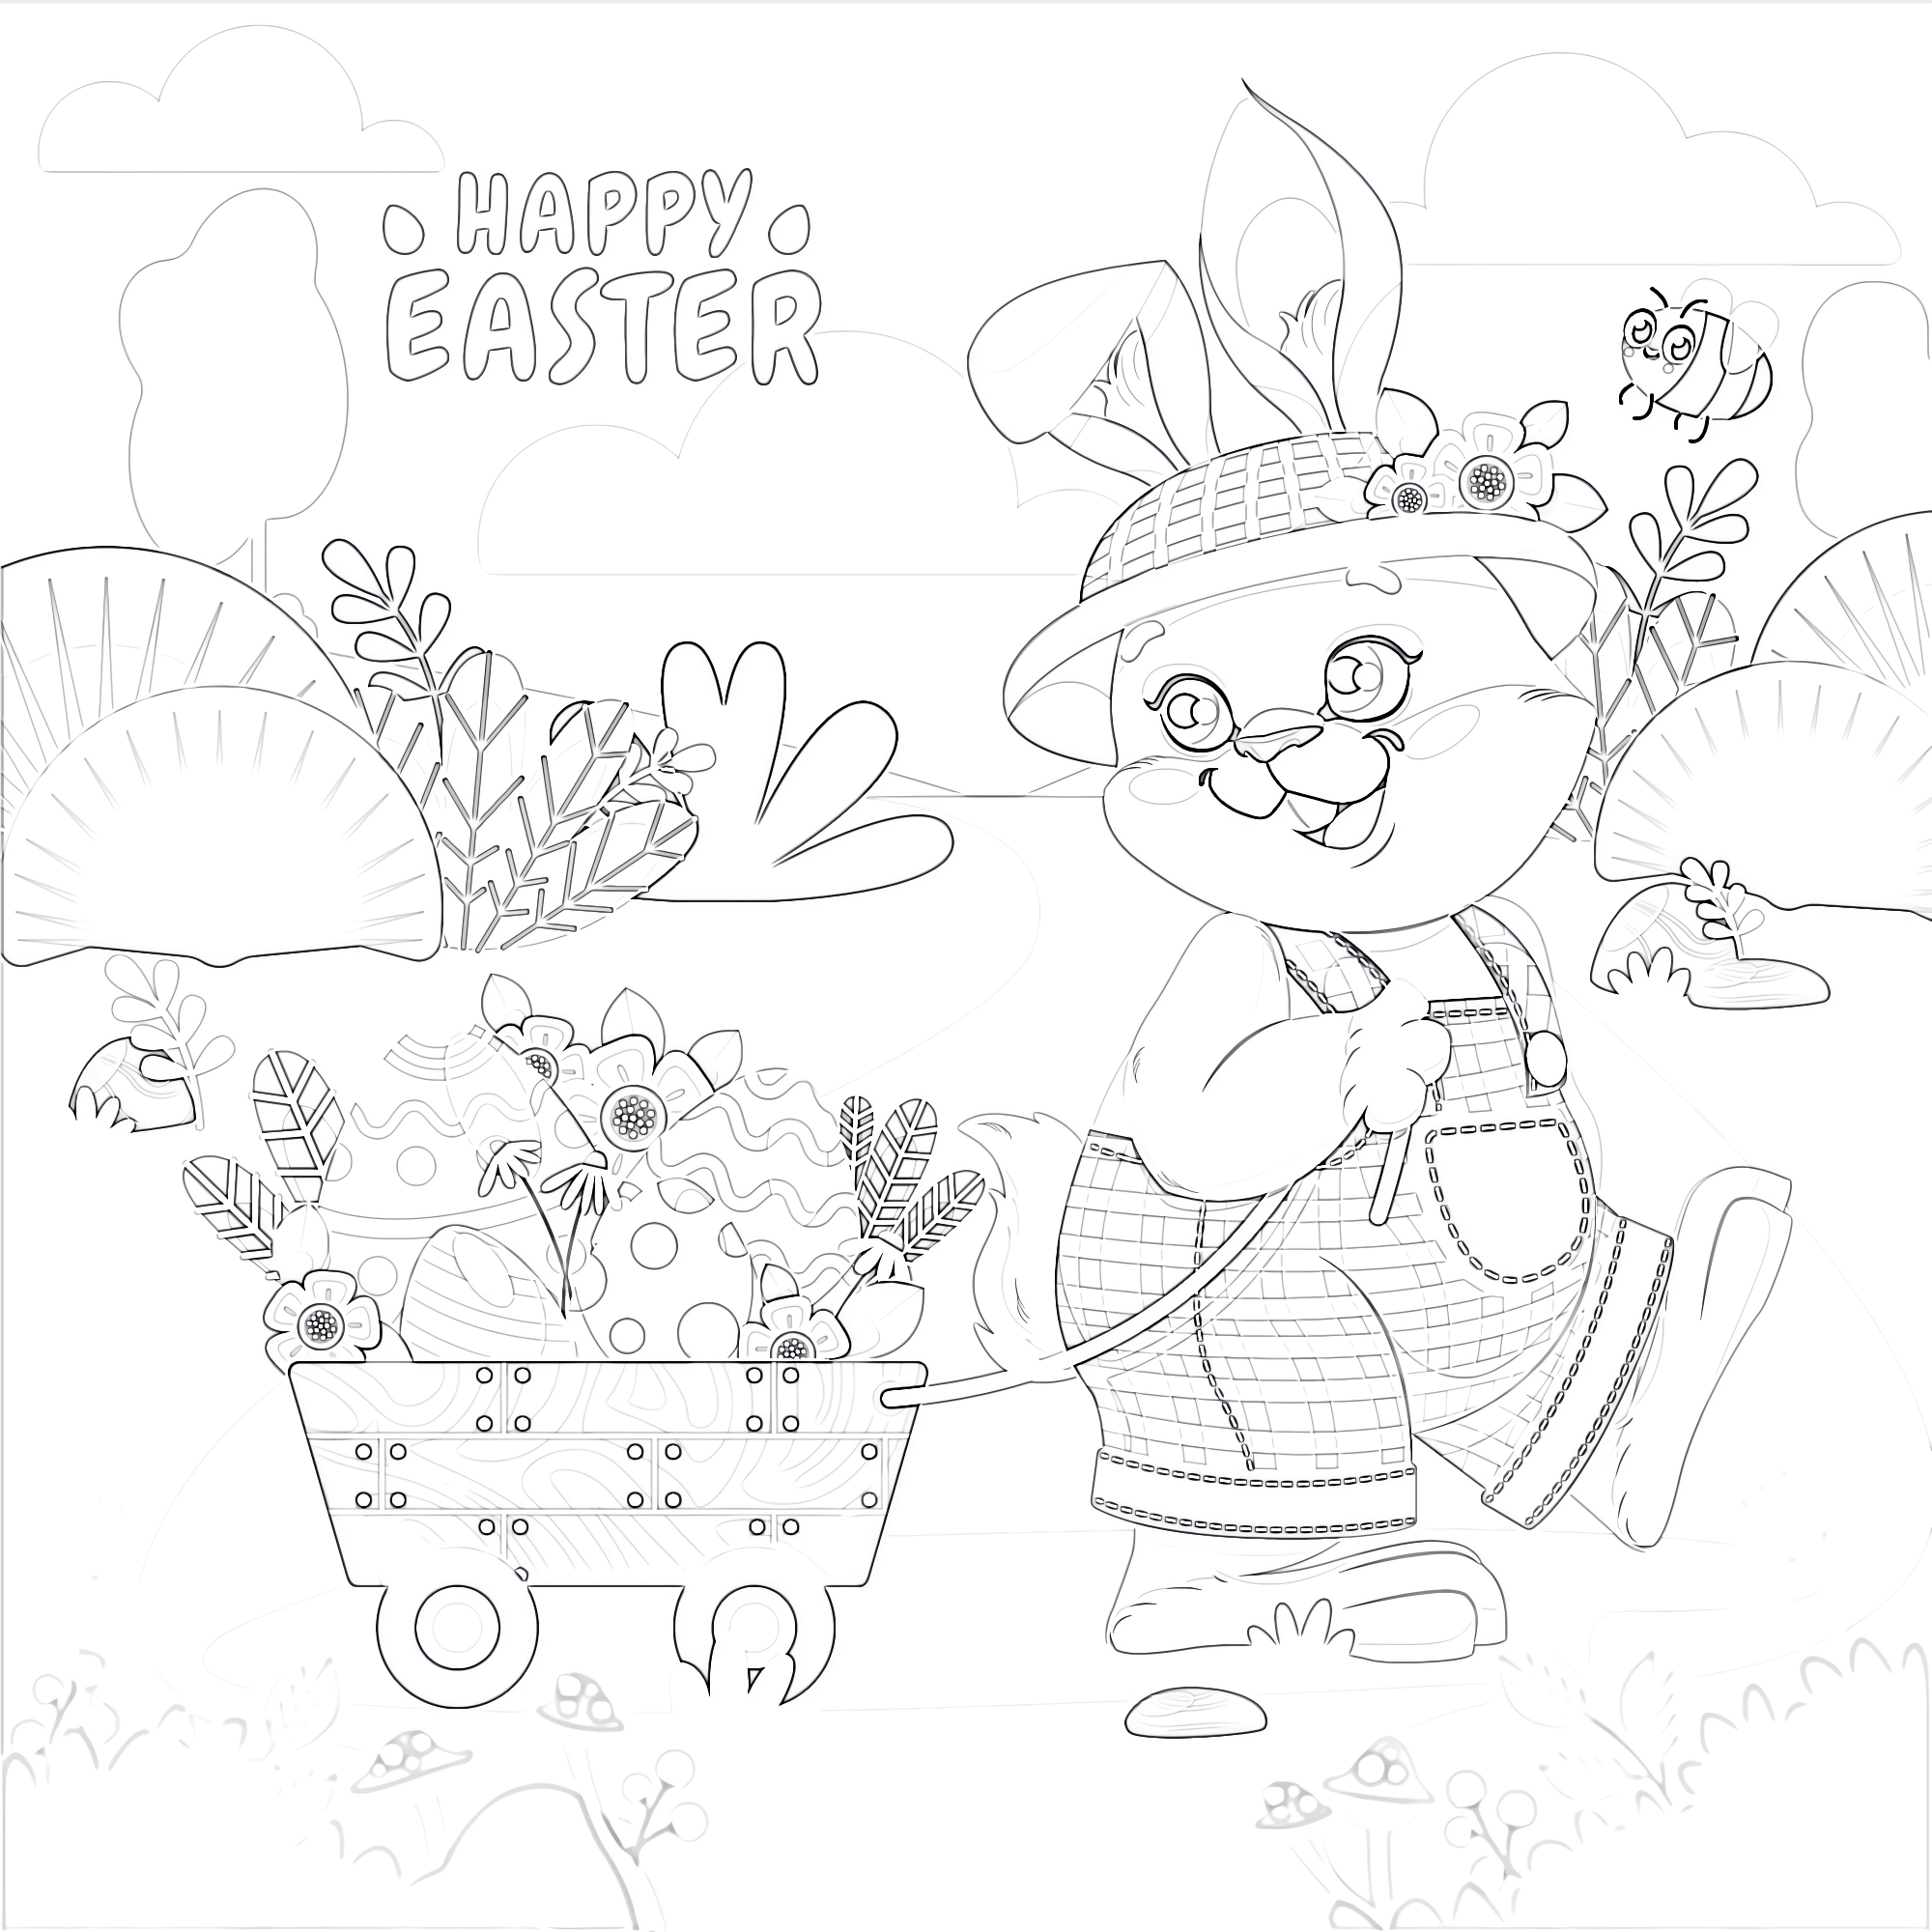 Happy Easter - Coloring page